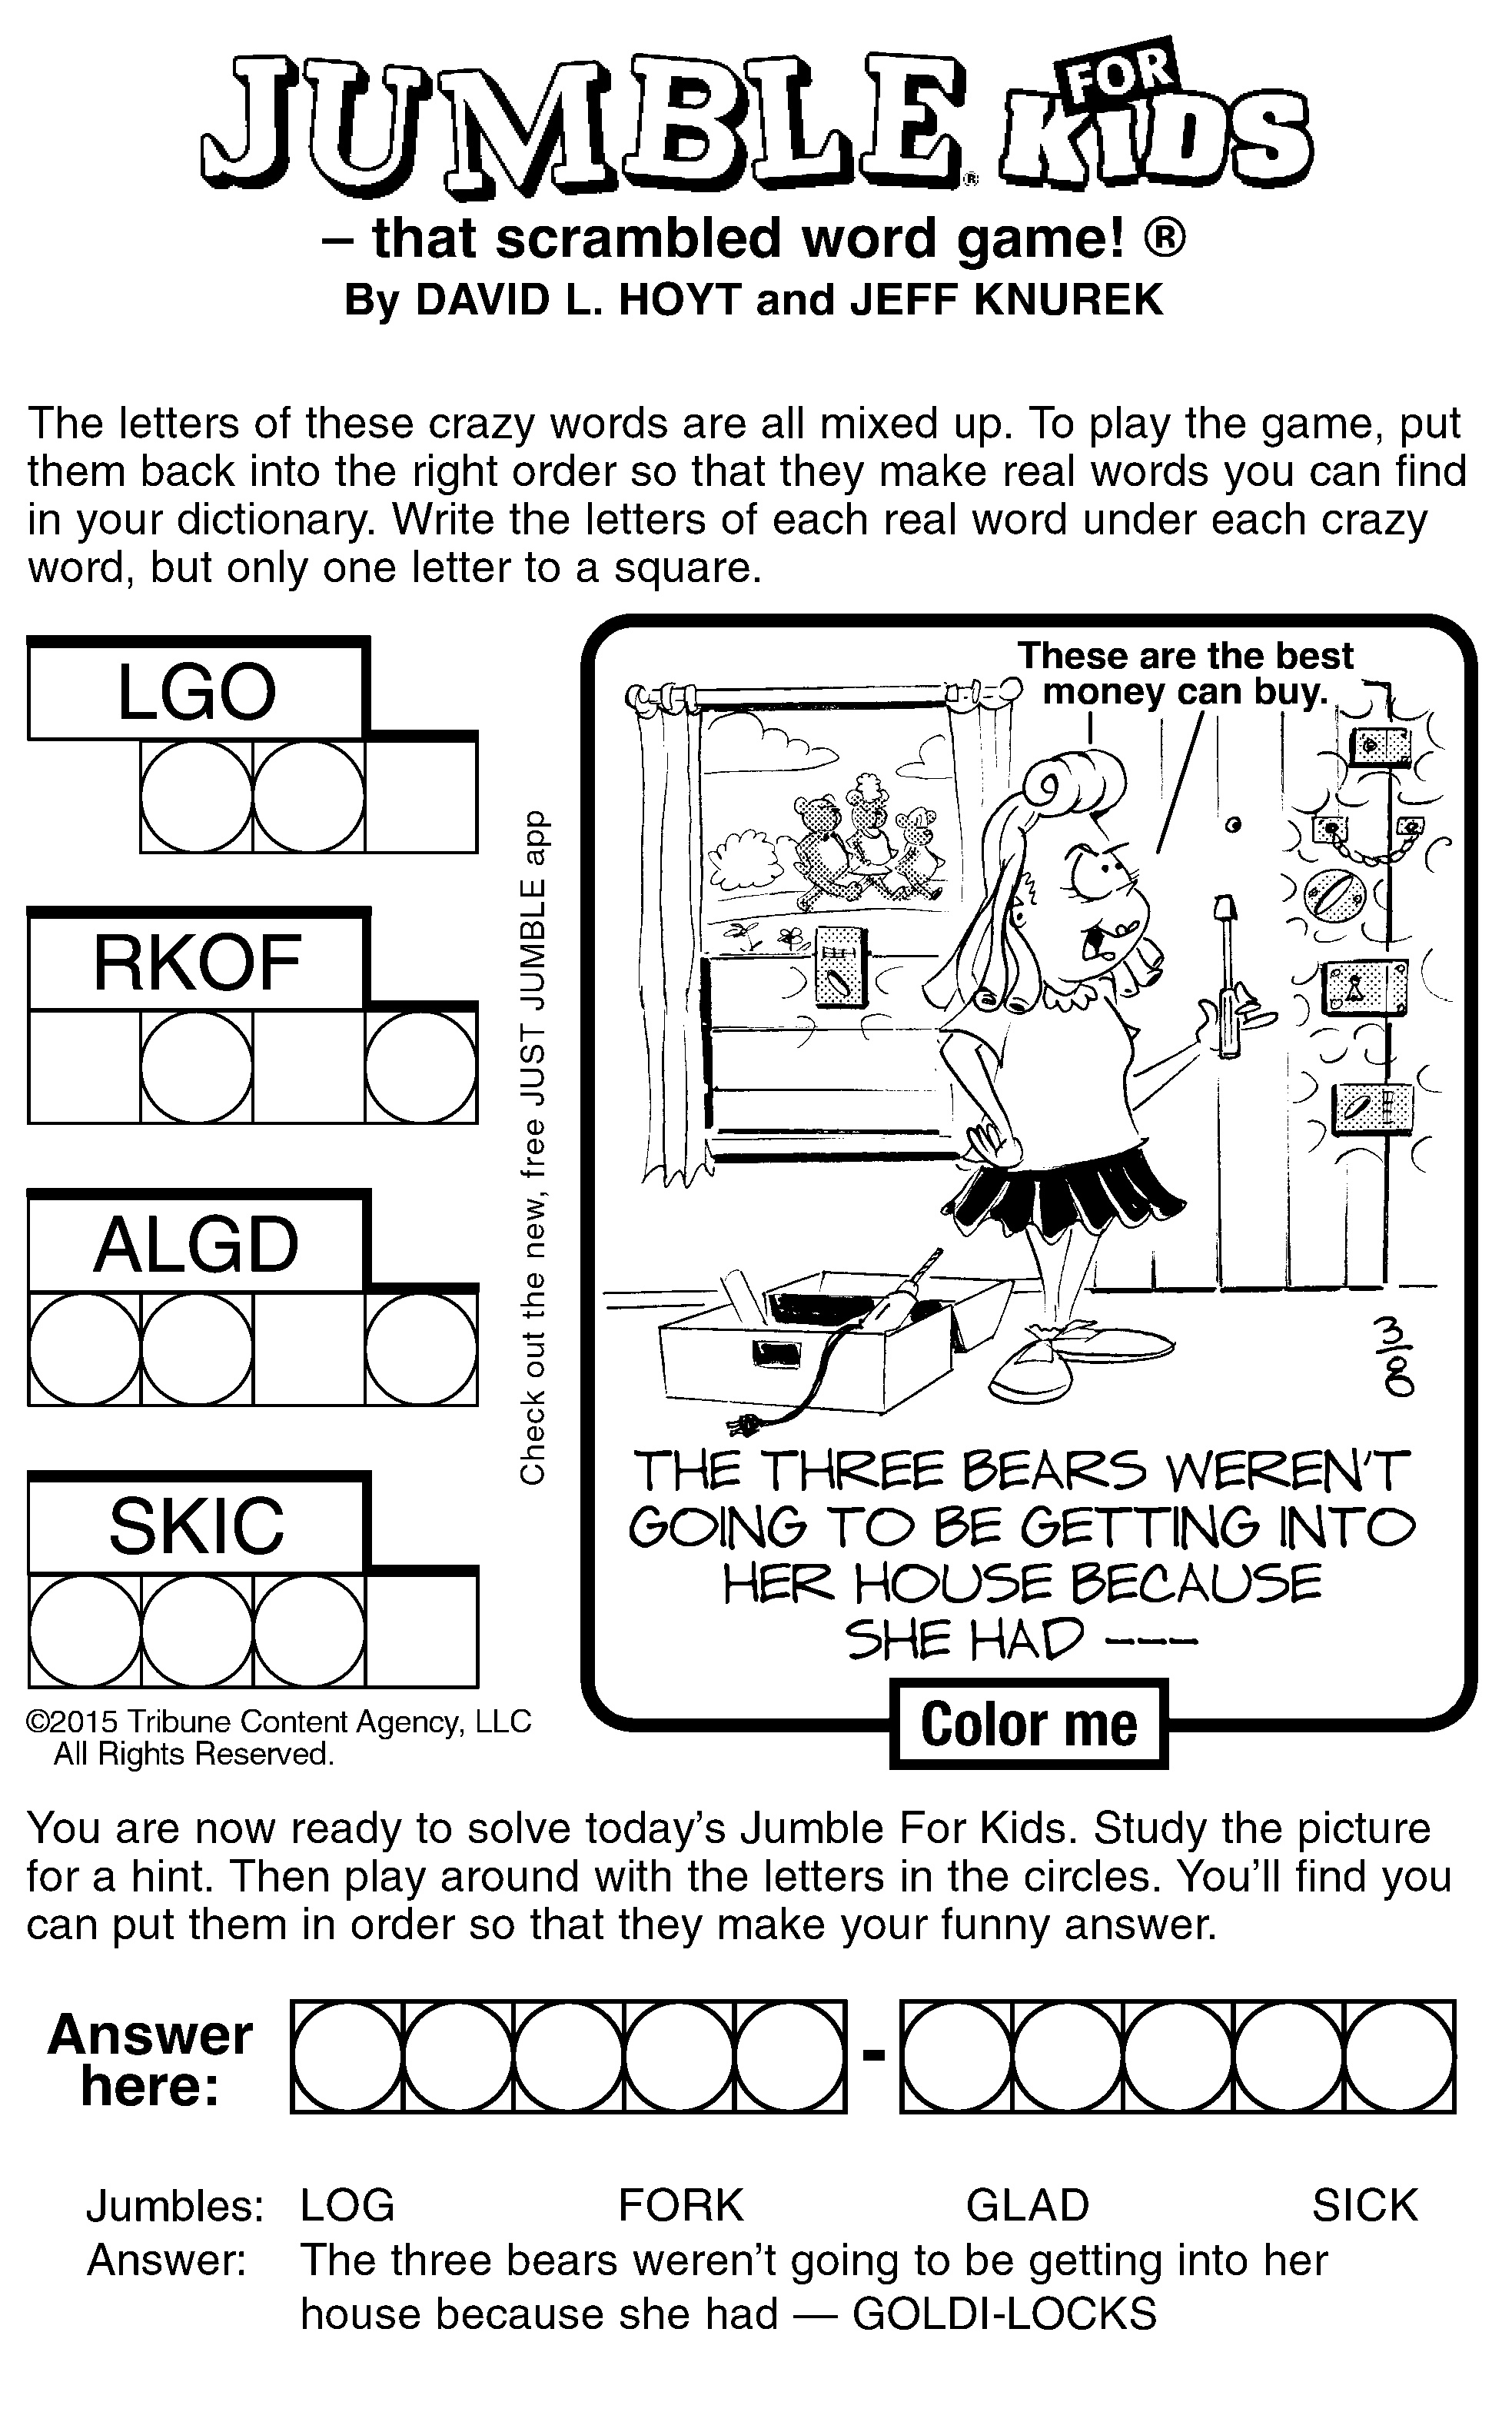 Sample Of Jumble For Kids | Tribune Content Agency (March 8, 2015) - Free Printable Jumble Word Games